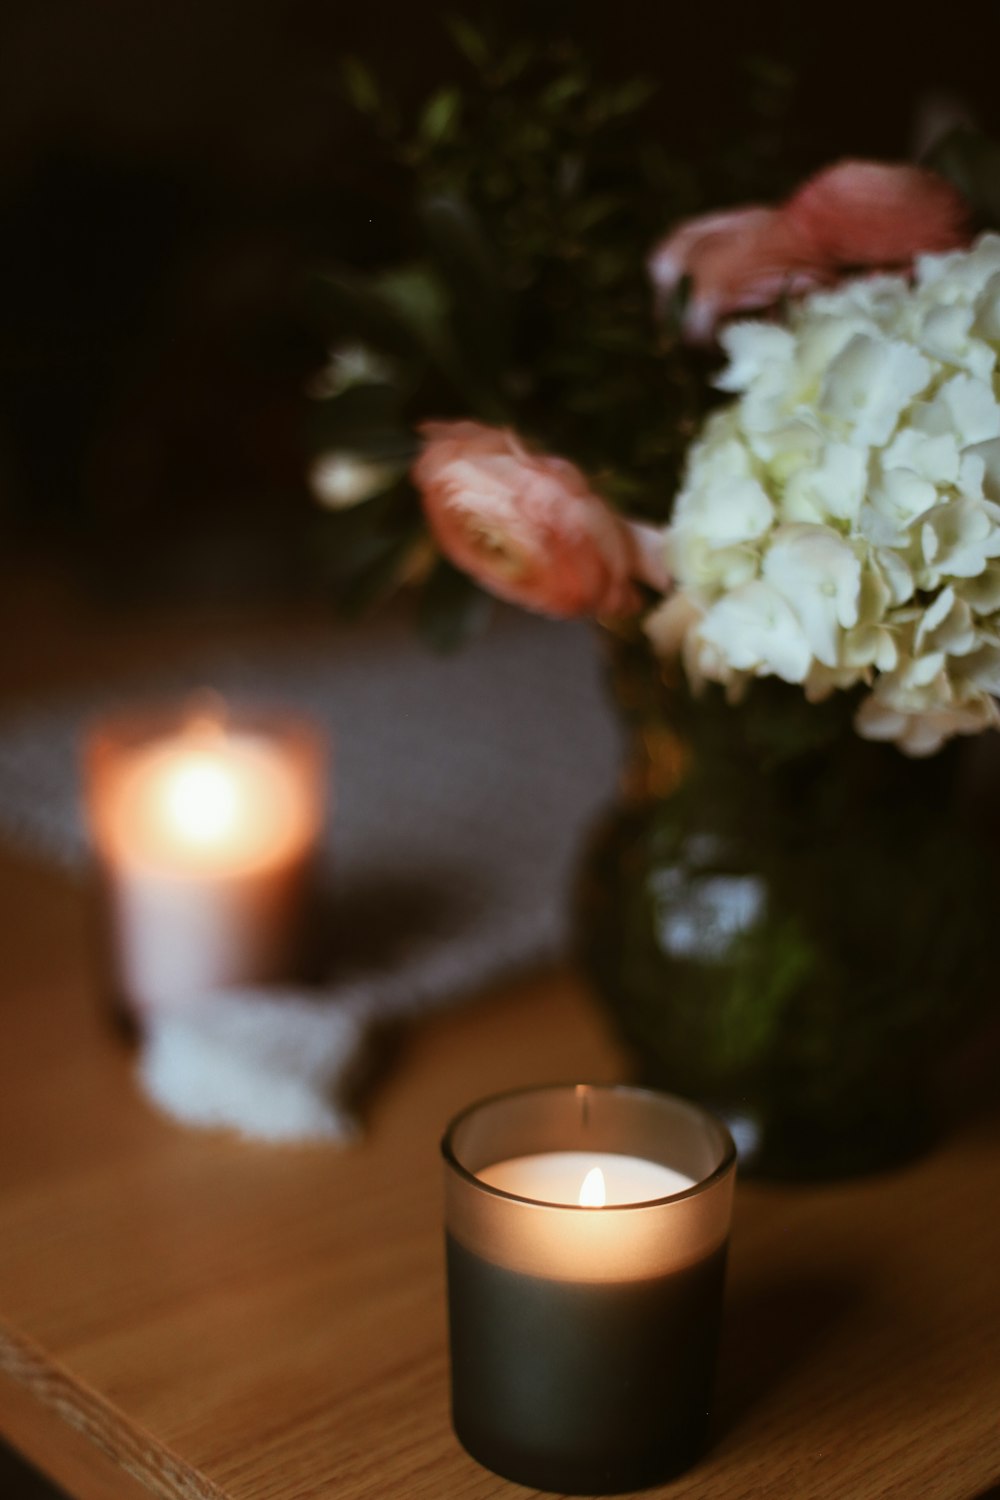 a vase with flowers and a lit candle on a table